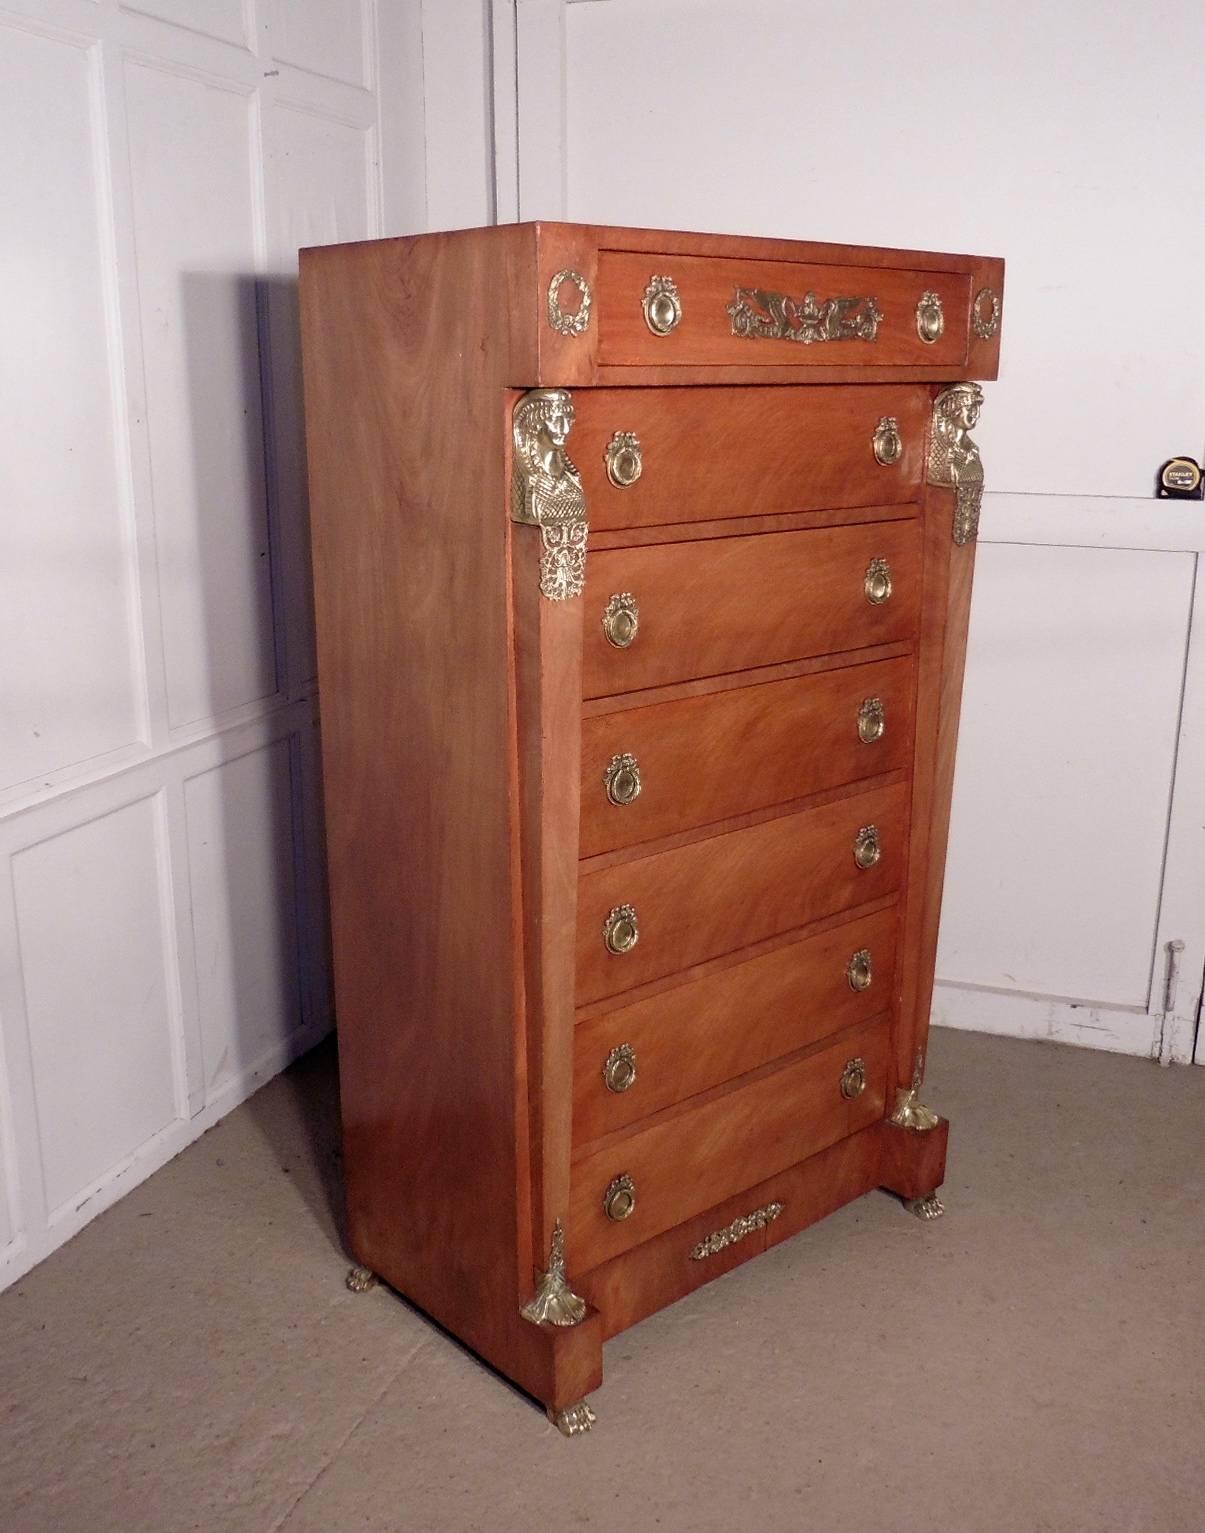 A tall French Art Deco walnut chest of drawers in the neoclassical style 
 
This is a French walnut chest, known as a seven day chest, it has seven drawers, one for each day of the week, the chest is adorned wth fine Ormolu decoration 
The chest